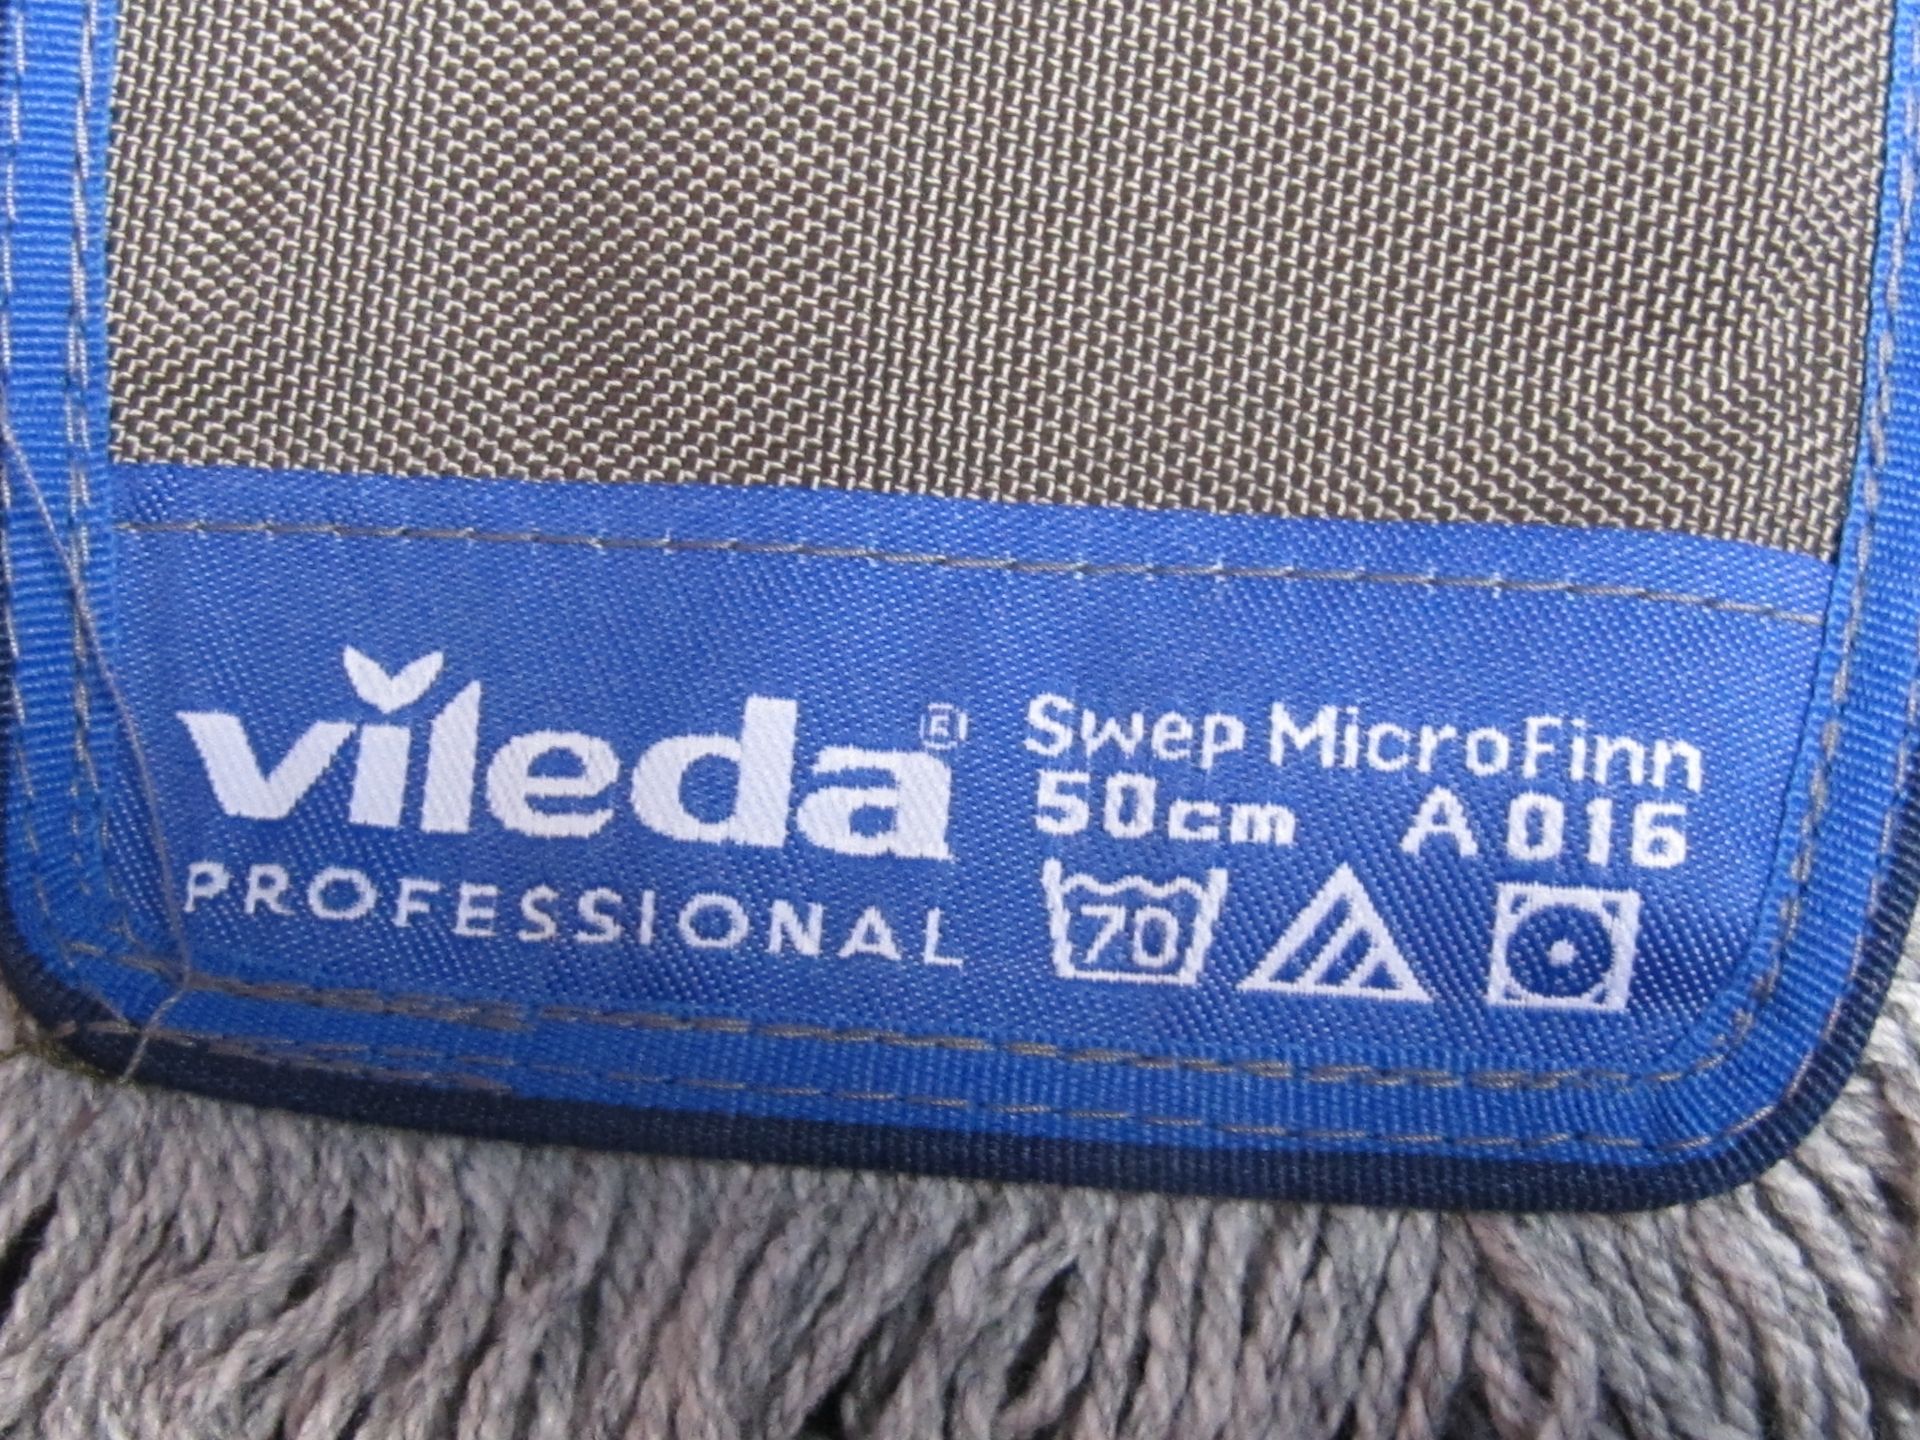 30 x Vileda Replacement Mop Head. Brand new stock. No vat on Hammer. Shipping available. - Image 3 of 5